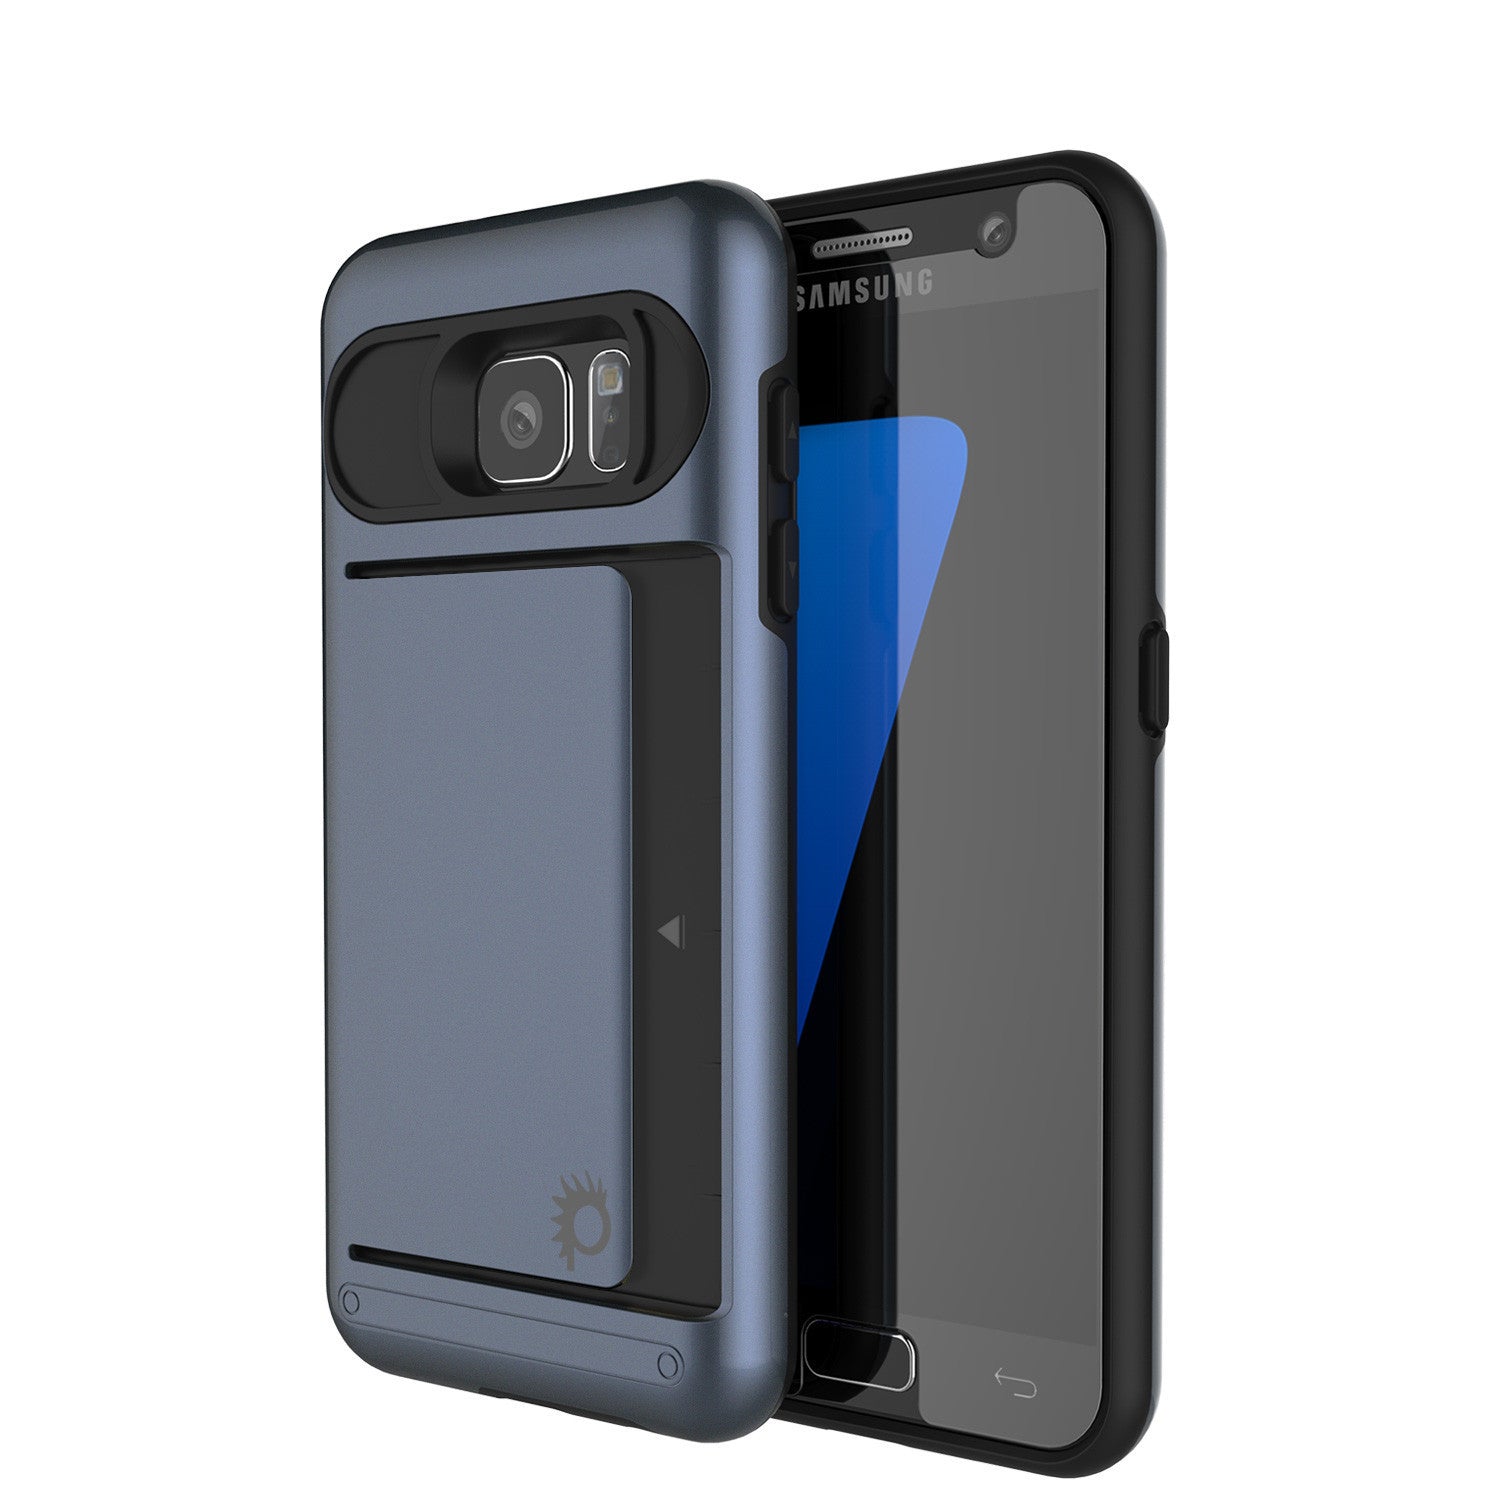 Galaxy Note 5 Case PunkCase CLUTCH Navy Series Slim Armor Soft Cover Case w/ Tempered Glass (Color in image: Navy)